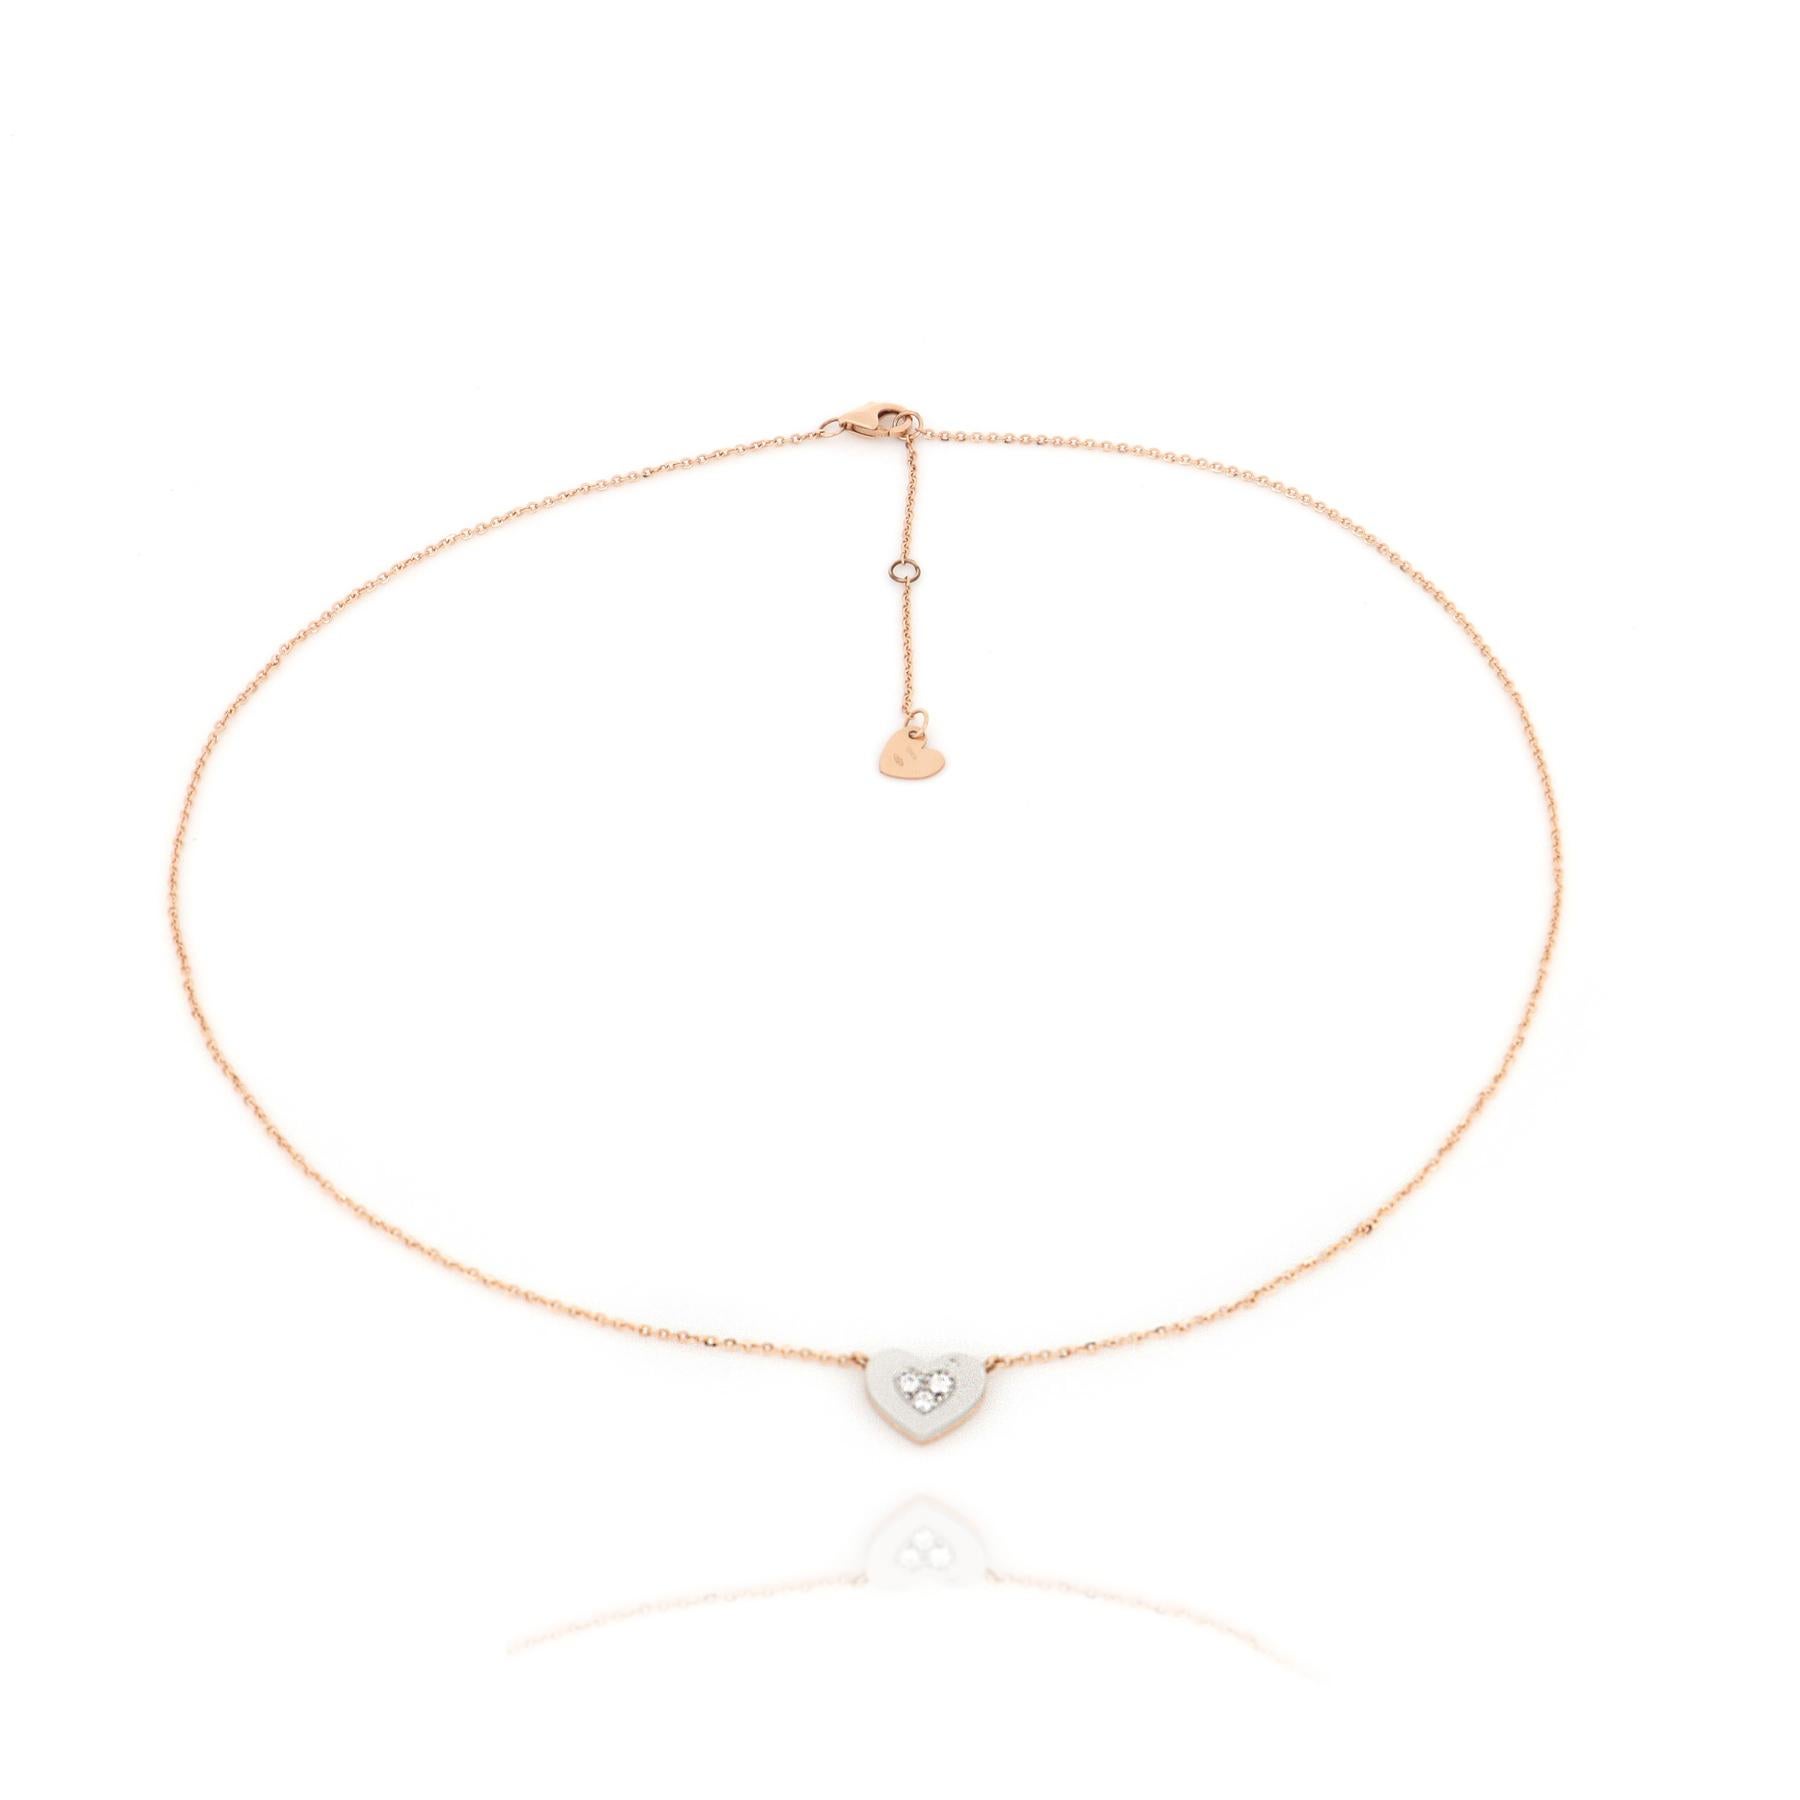 White and rose gold necklace where the focus of attention is on the bright diamonds in the central heart, which opening reveals a precious secret.

Necklace lenght 43 cm with extension at 45 cm and 48 cm, rose gold diamond chain, openable heart